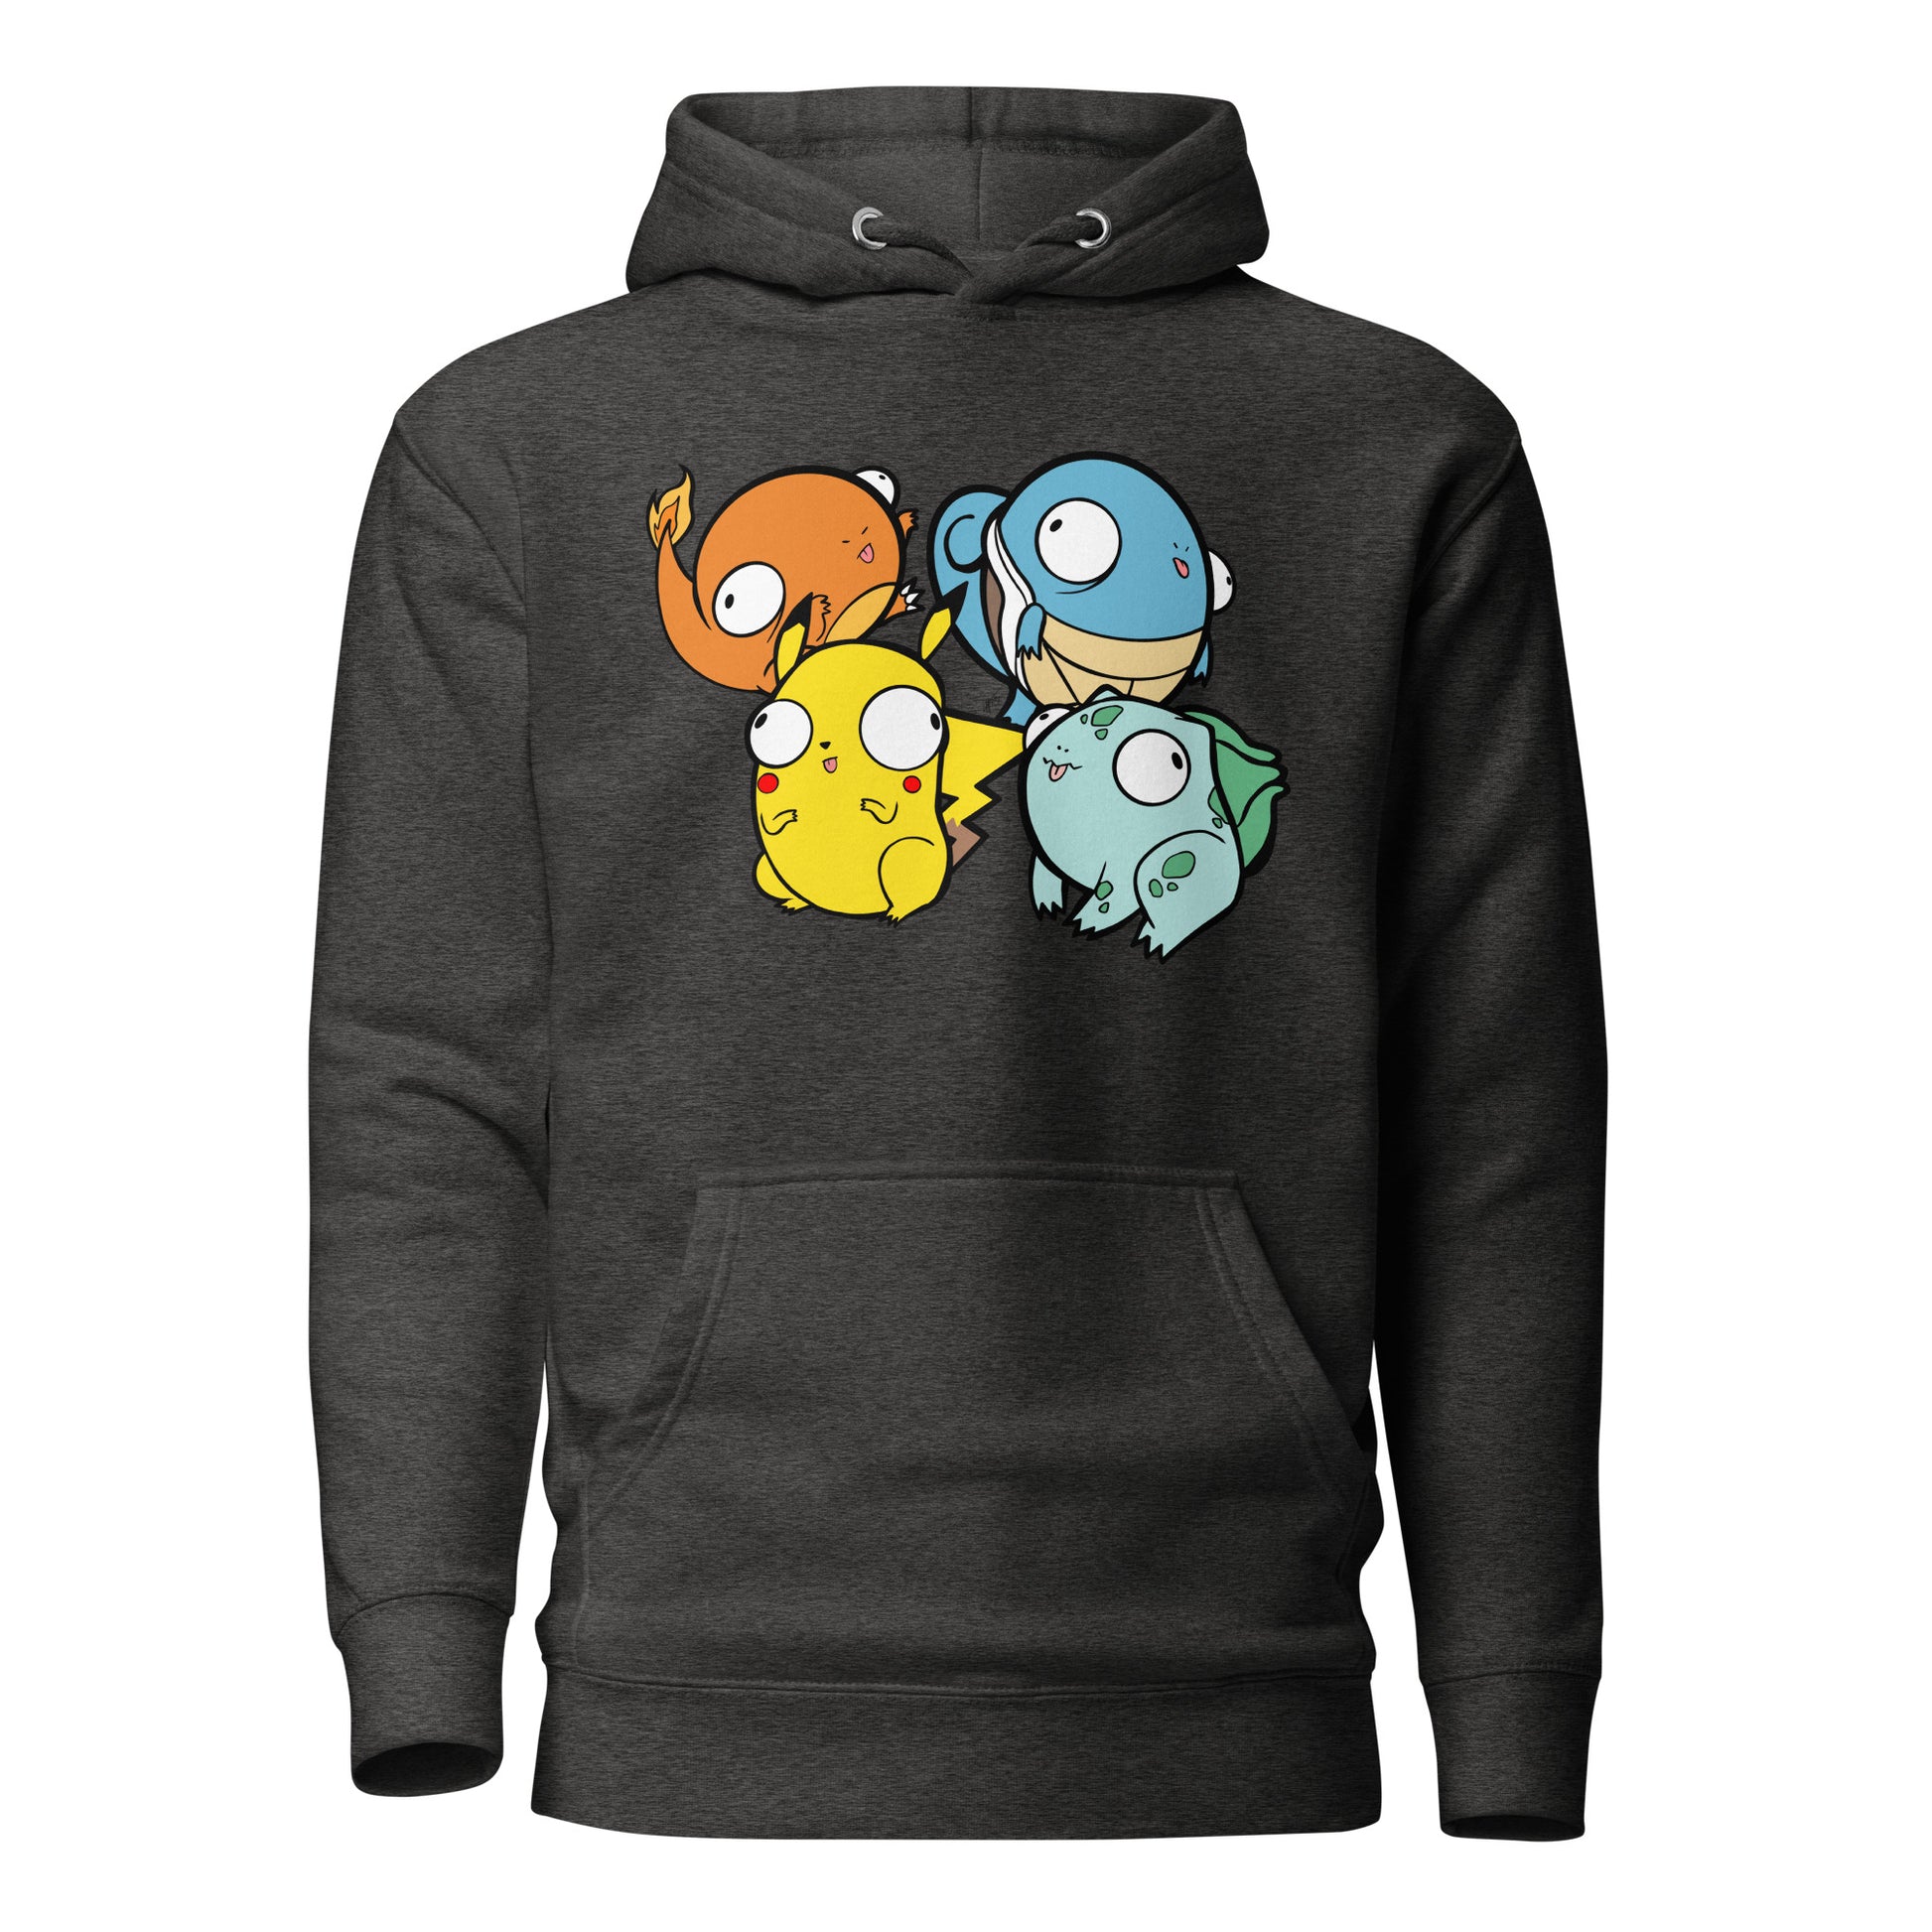 Pokederps Unisex Hoodie  Level 1 Gamers Charcoal Heather S 